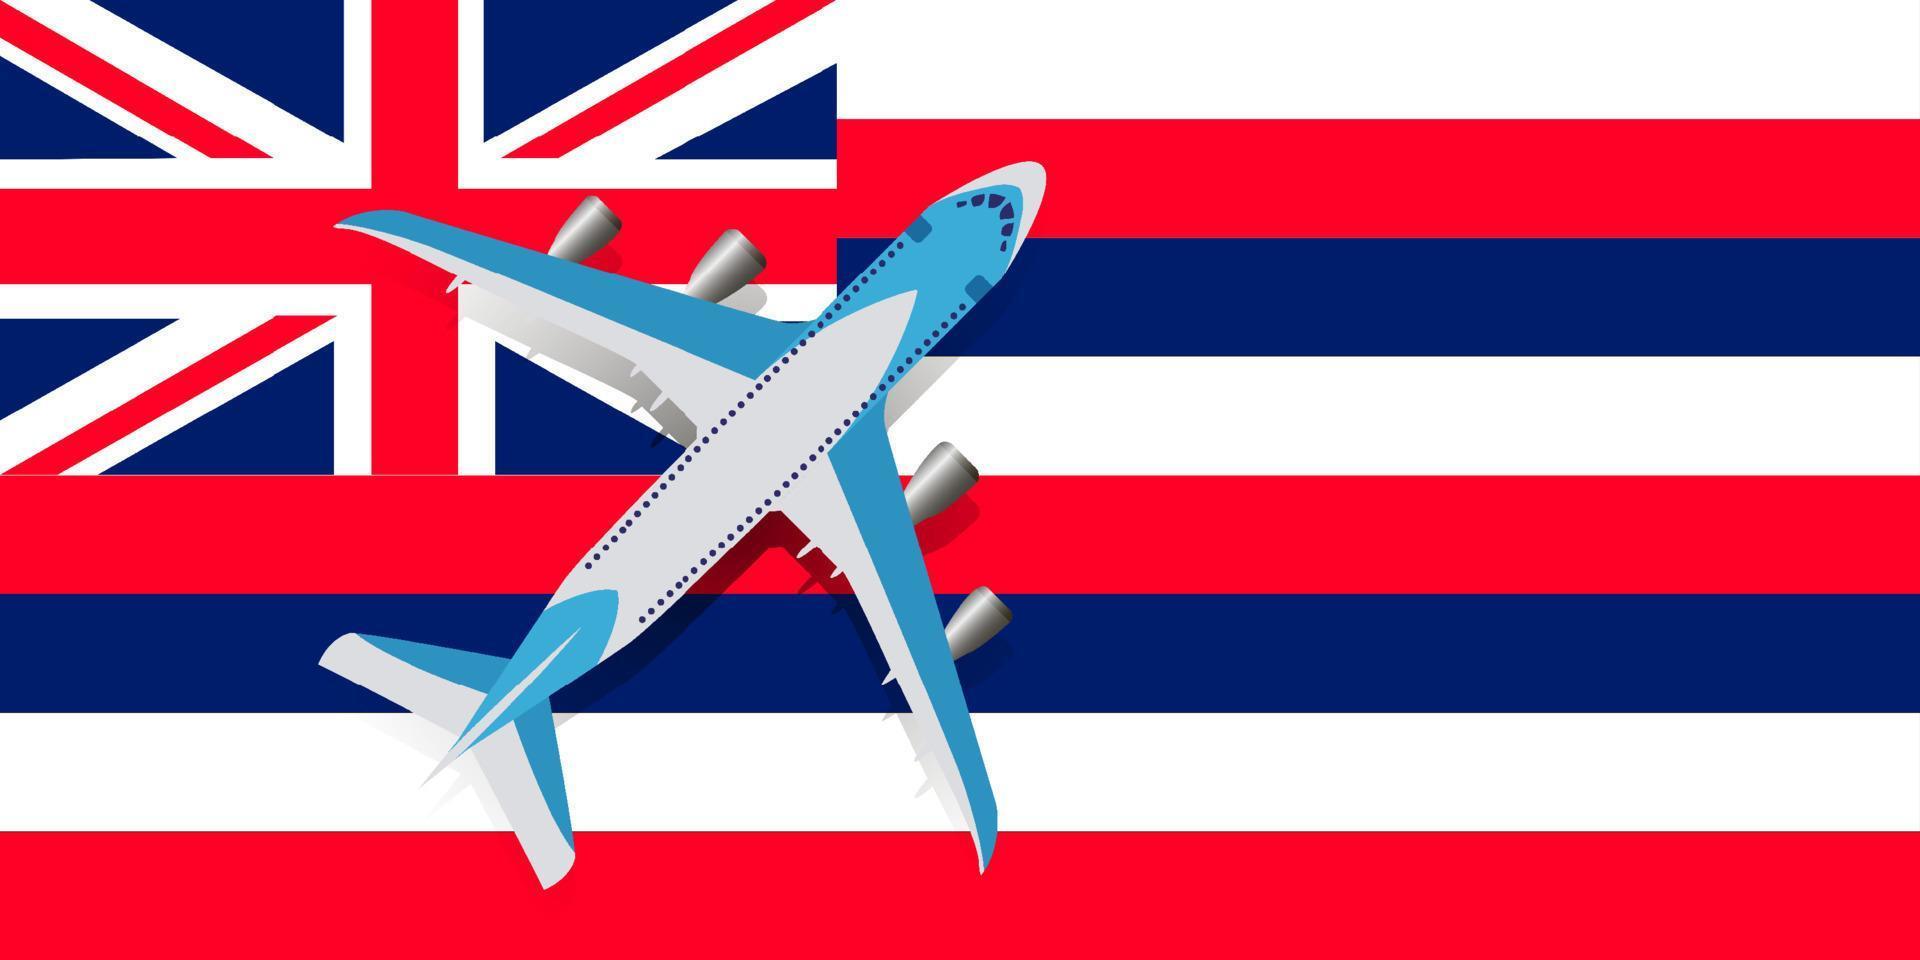 Vector Illustration of a passenger plane flying over the flag of Hawaii.